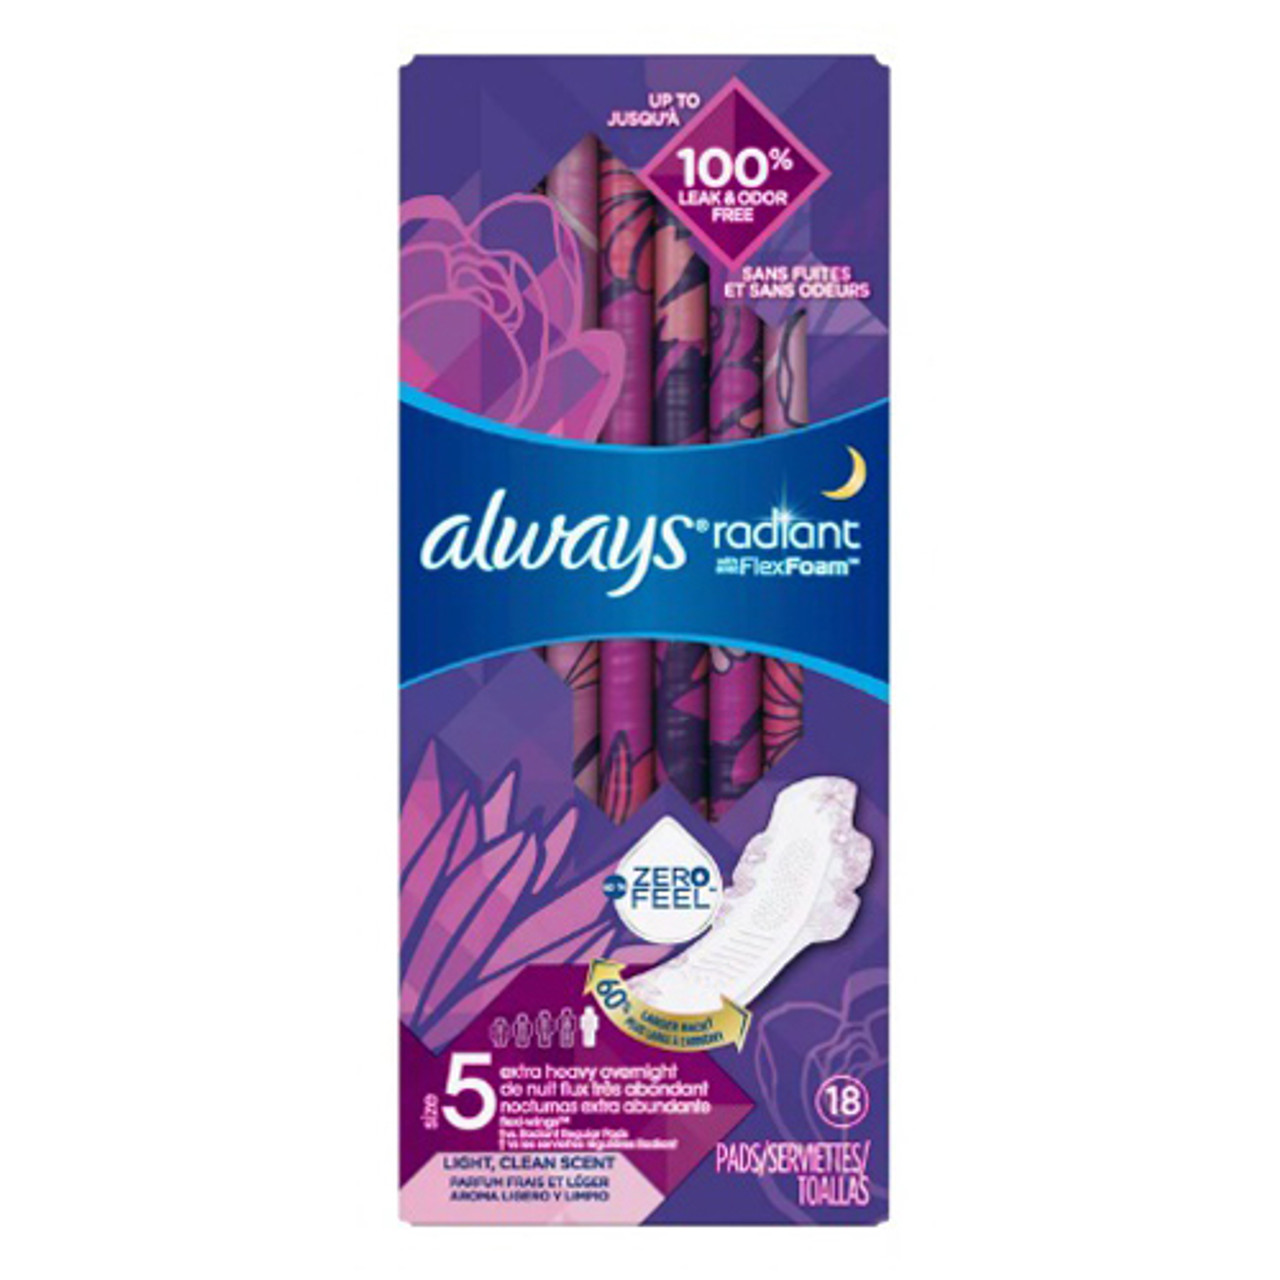 Always Maxi Pads Size 5 Extra Heavy Overnight Absorbency Unscented with  Wings, 20 Pads